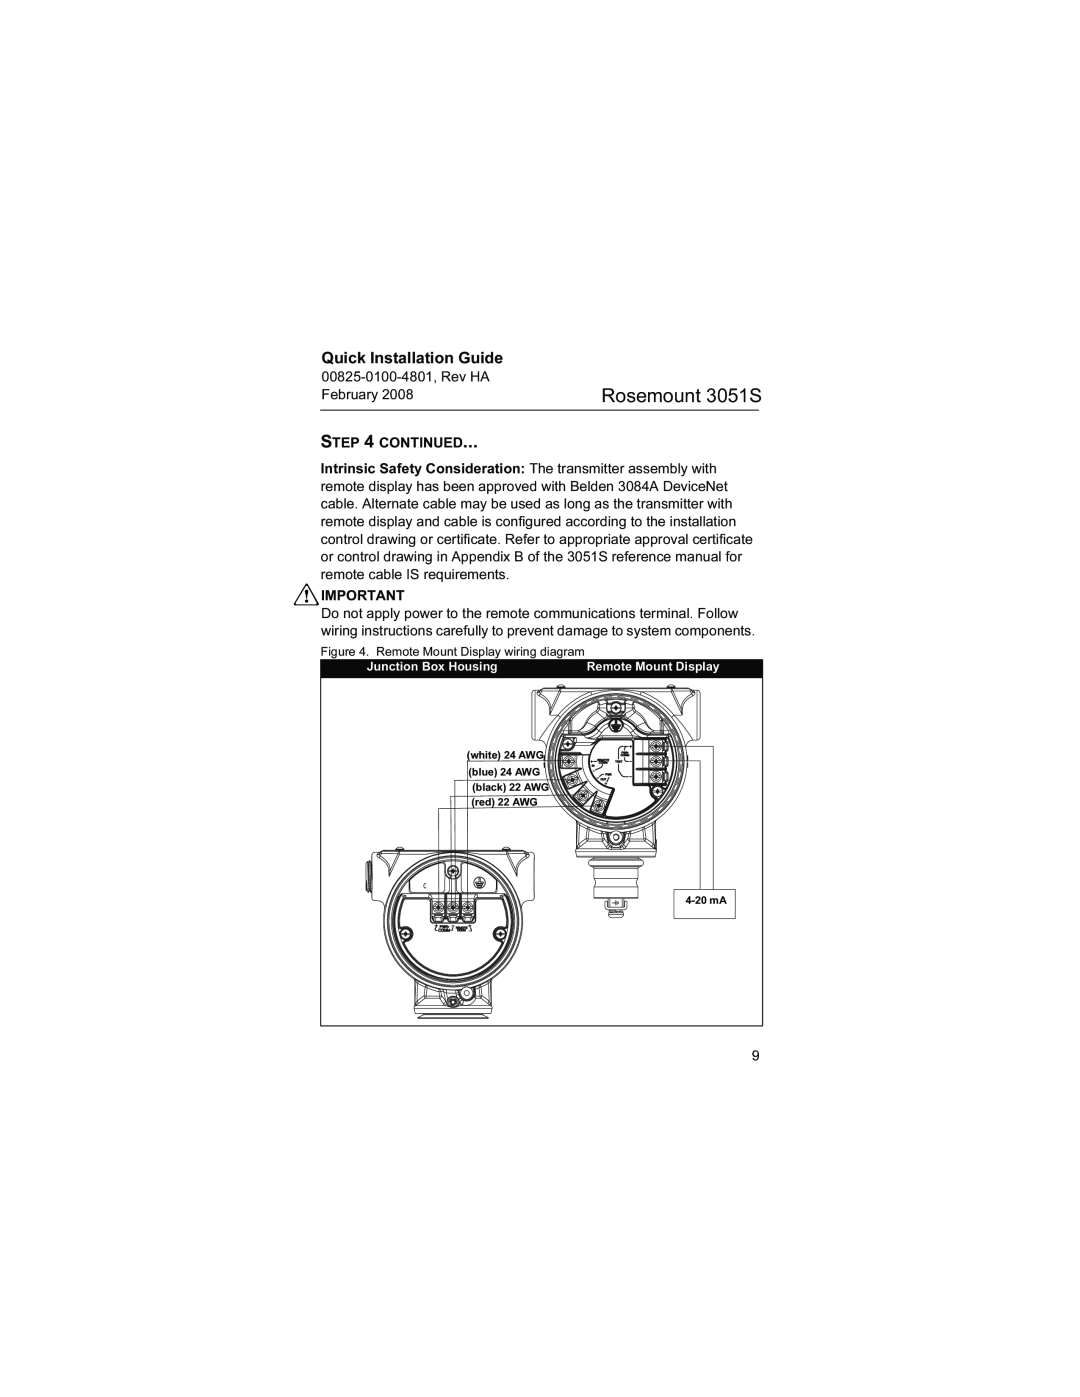 Emerson manual Rosemount 3051S, Quick Installation Guide, Remote Mount Display wiring diagram 